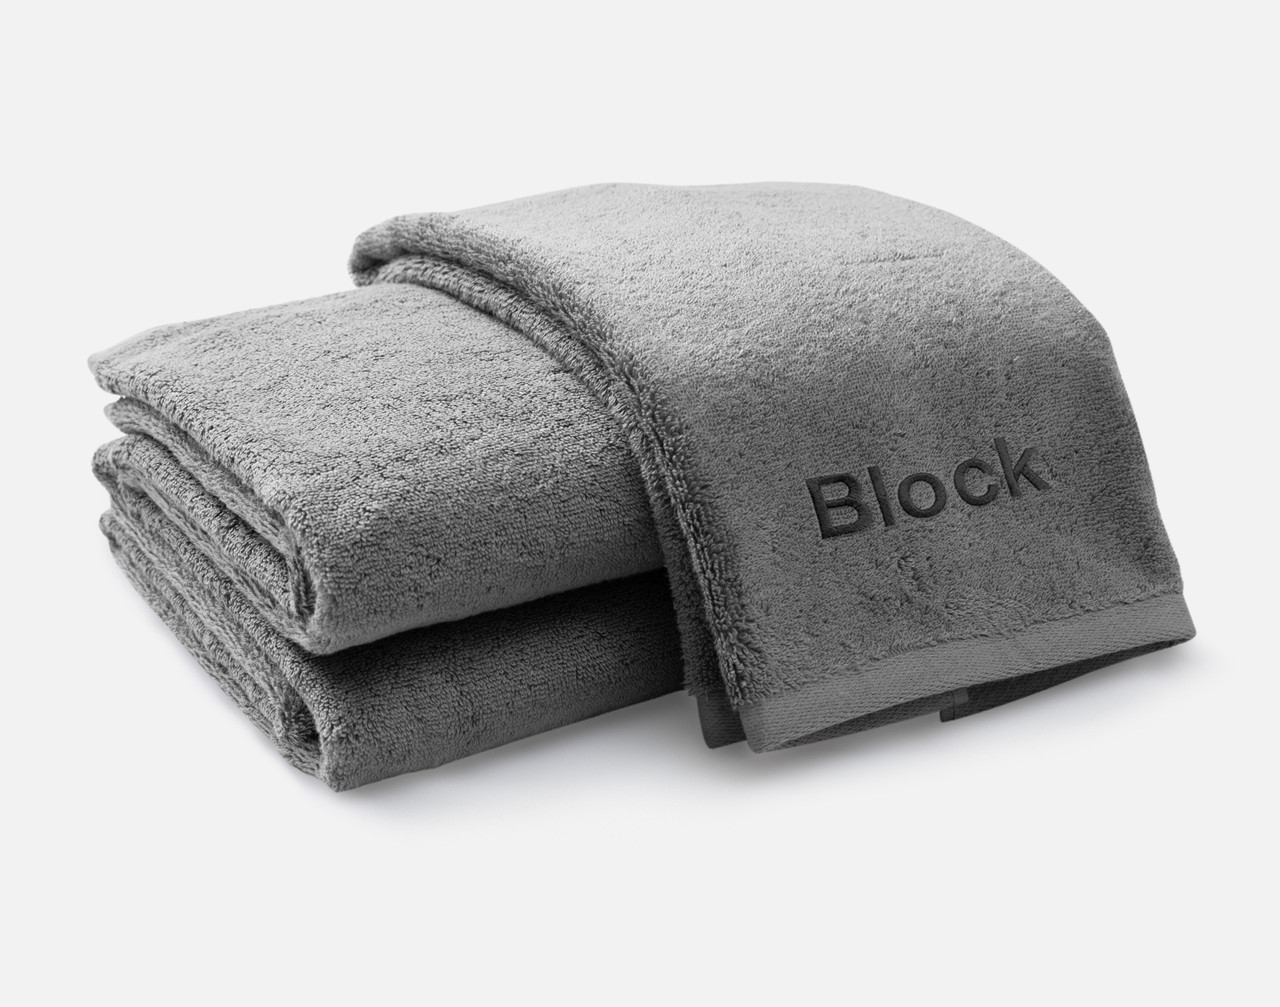 Folded view of our Custom Embroidered Towel Set in Grey, featuring Block font embroidered in white black along its bottom edge.